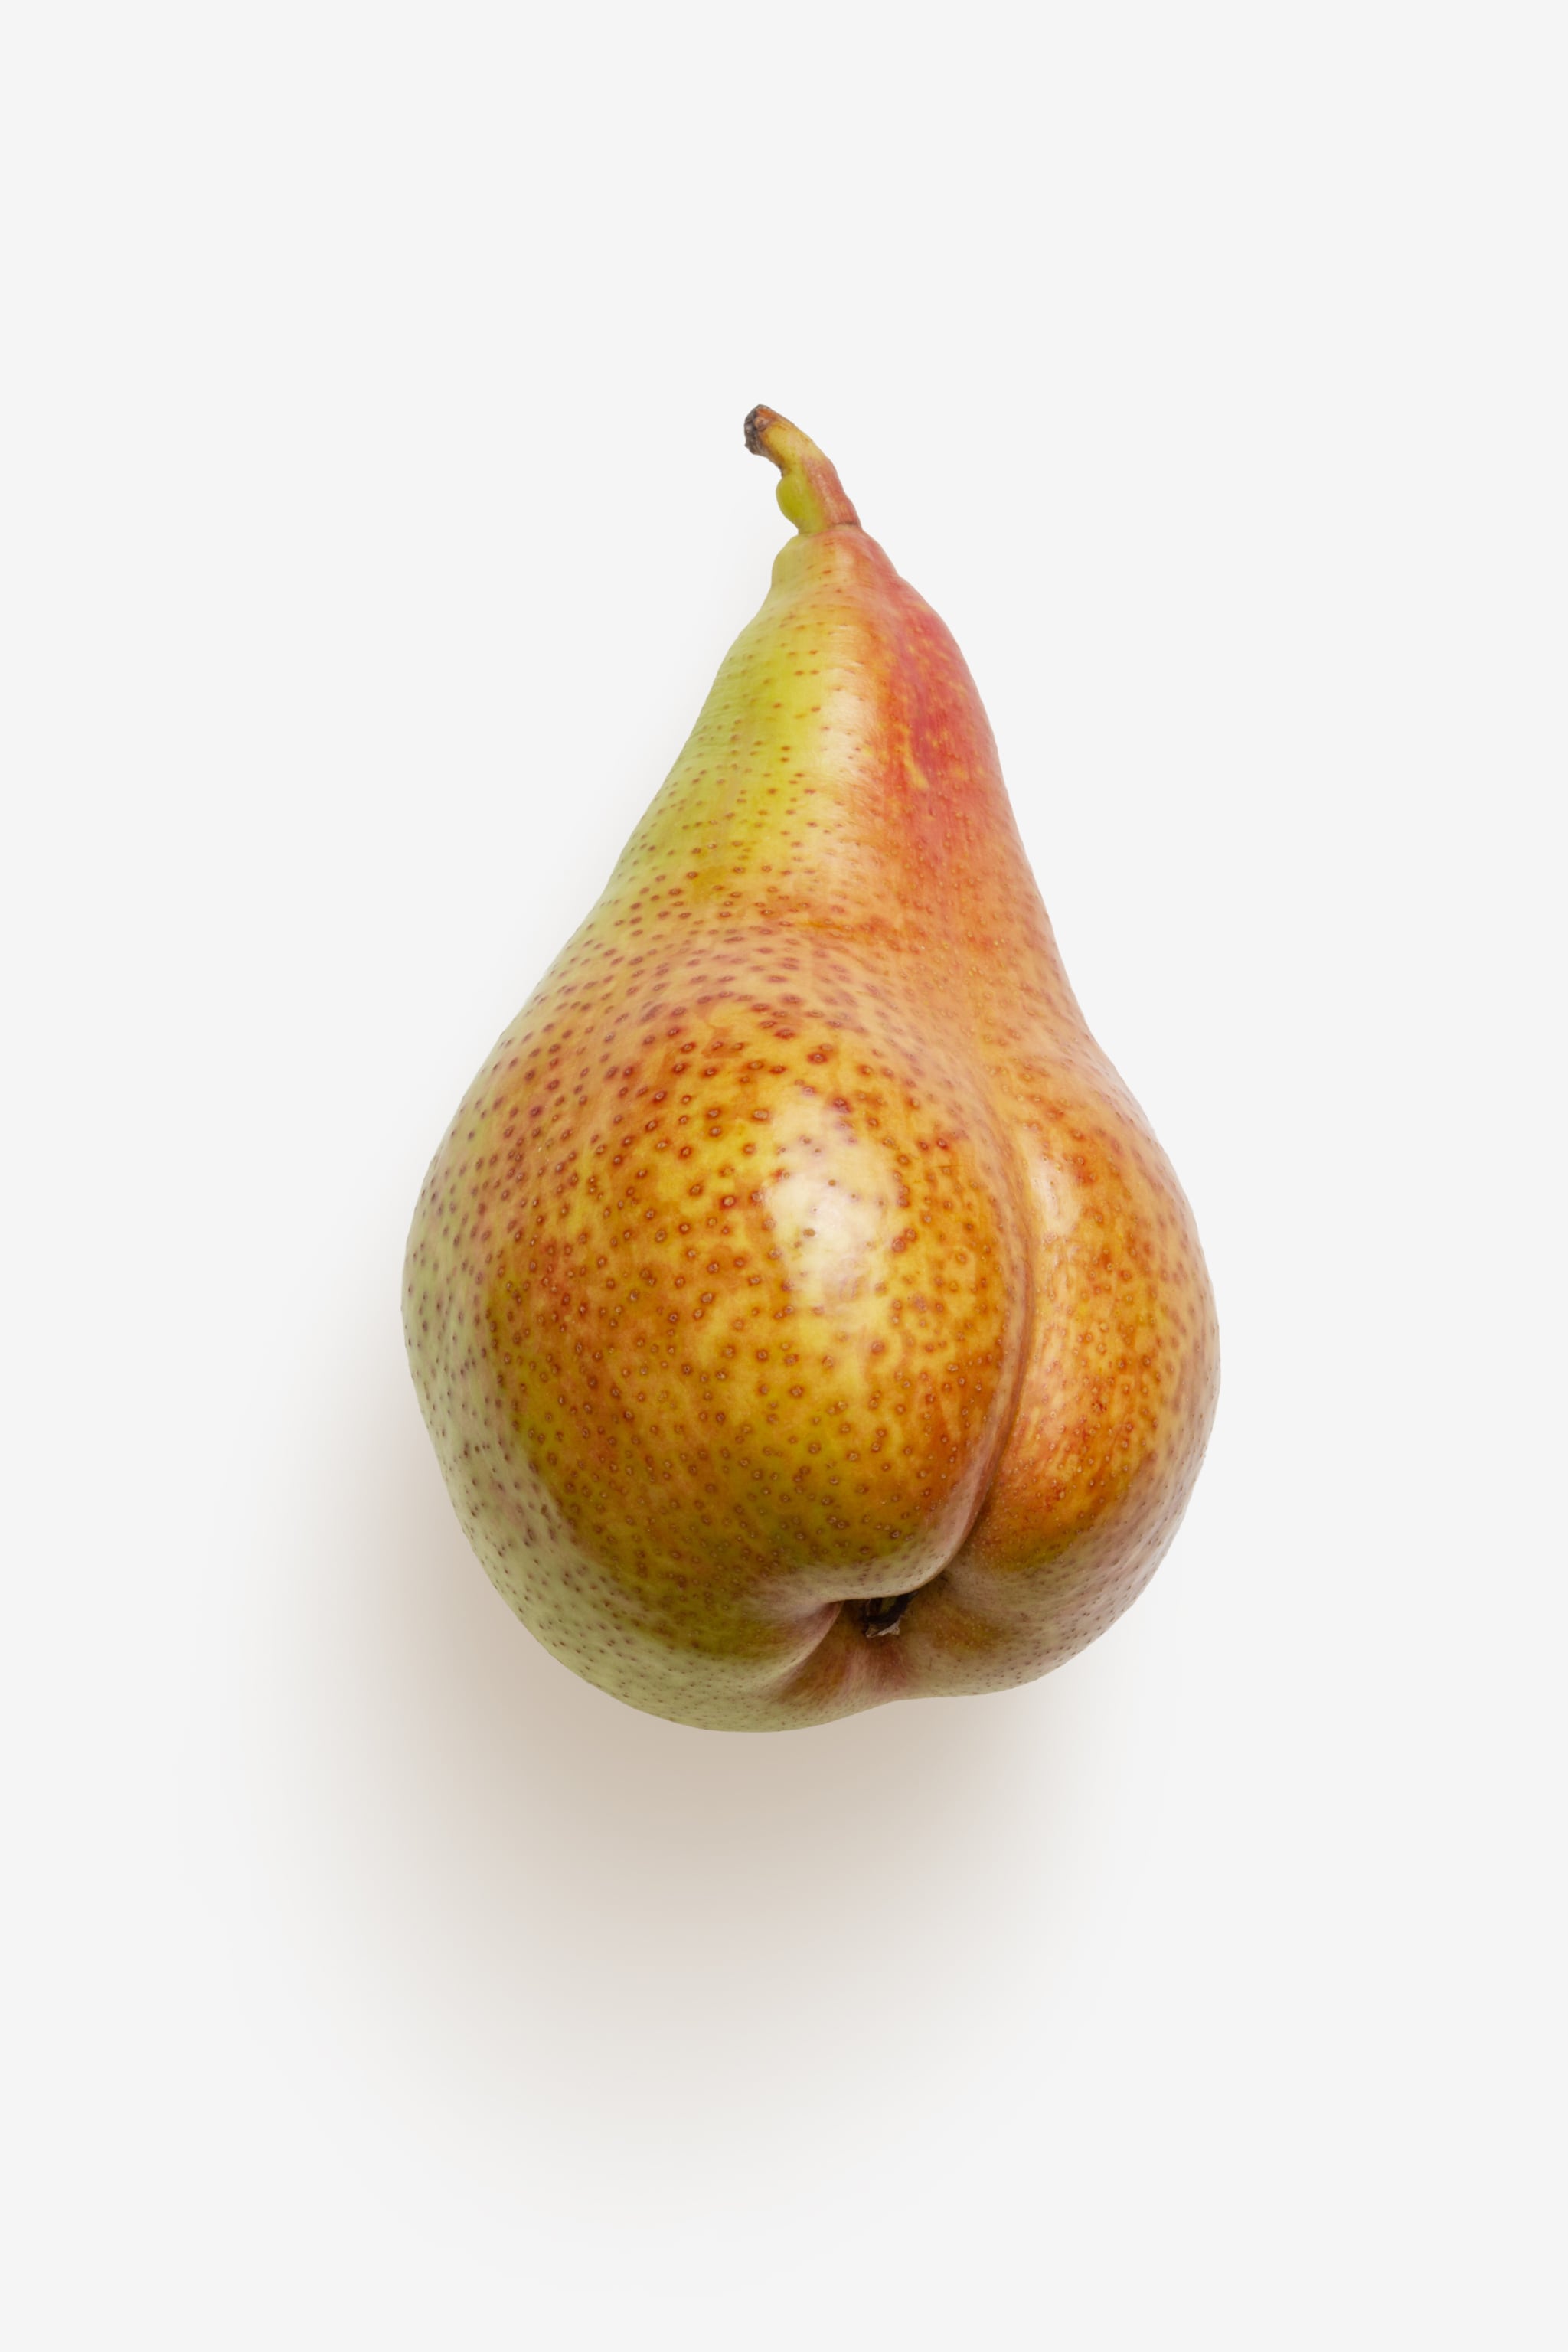 Clean Isolated PSD image of Pear on transparent background with separated shadow